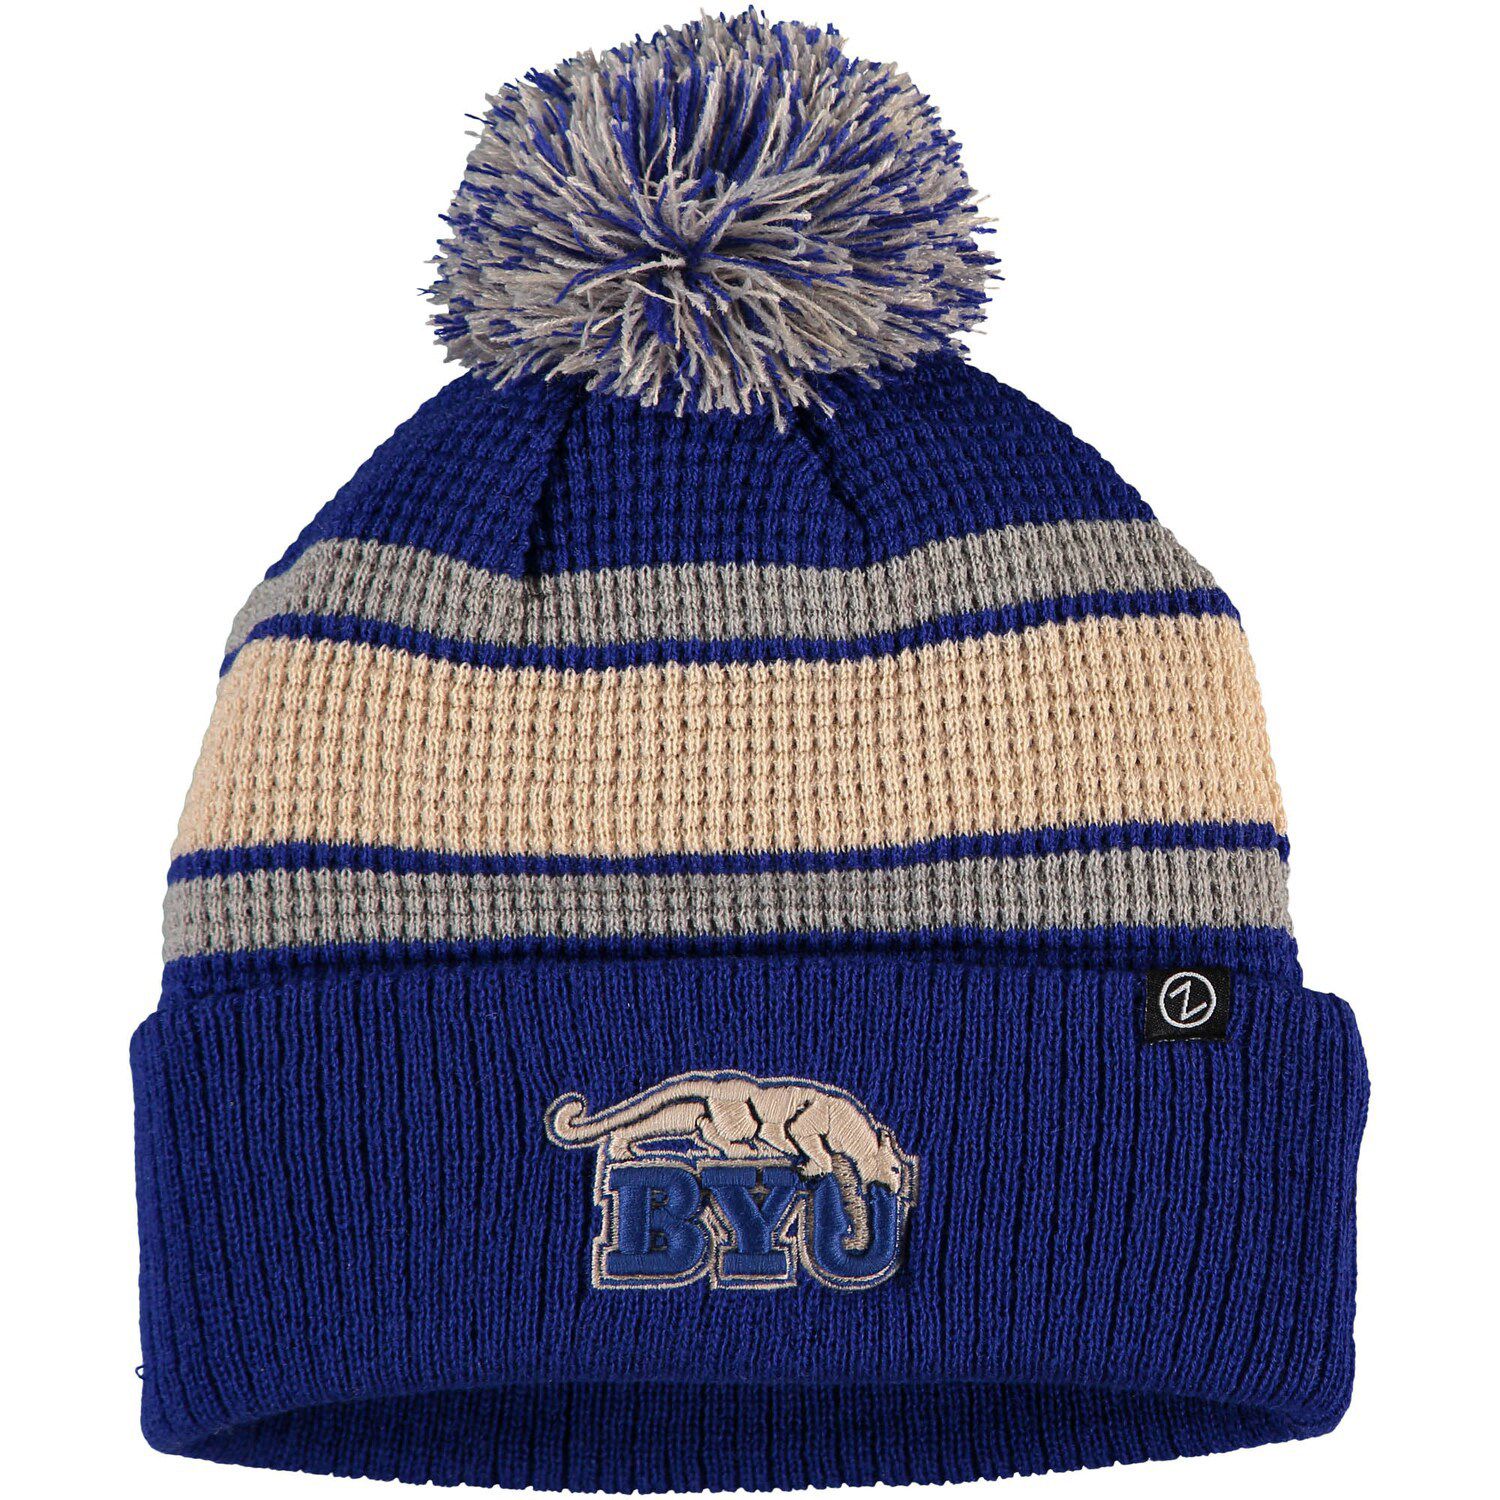 Image for Unbranded Men's Zephyr Navy BYU Cougars Lincoln Cuffed Pom Knit Hat at Kohl's.